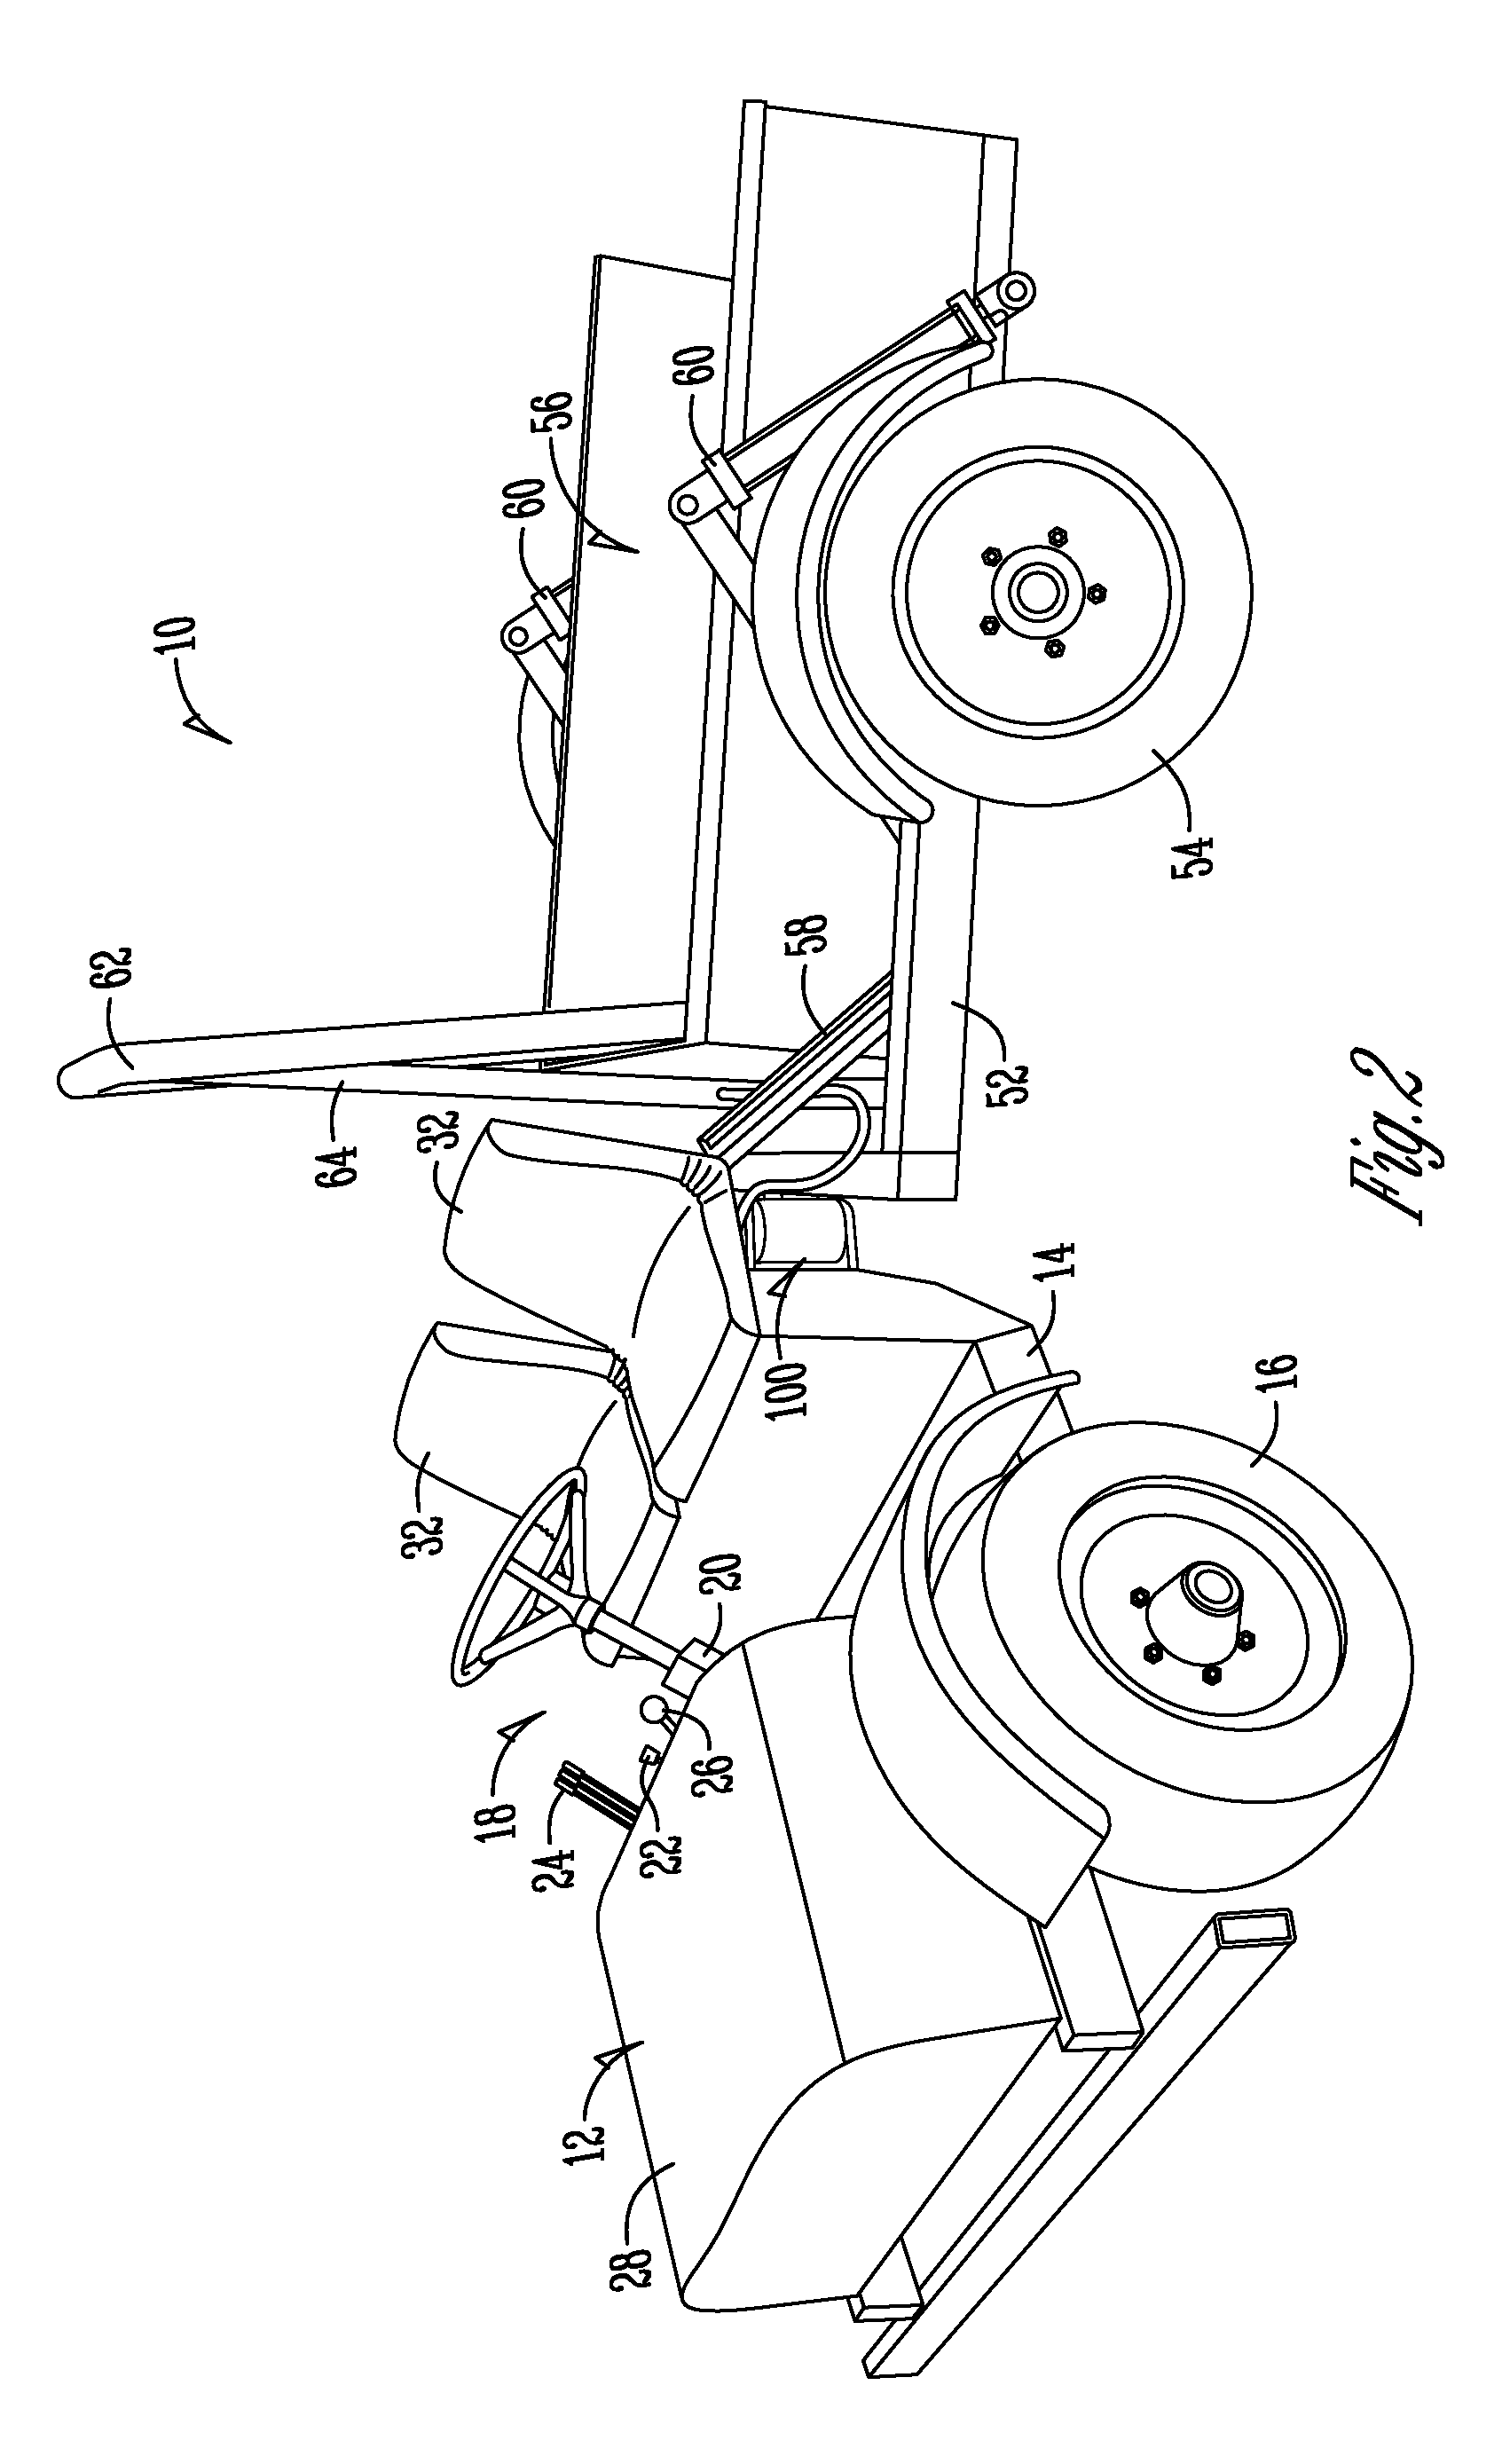 Center-pivot steering articulated vehicle